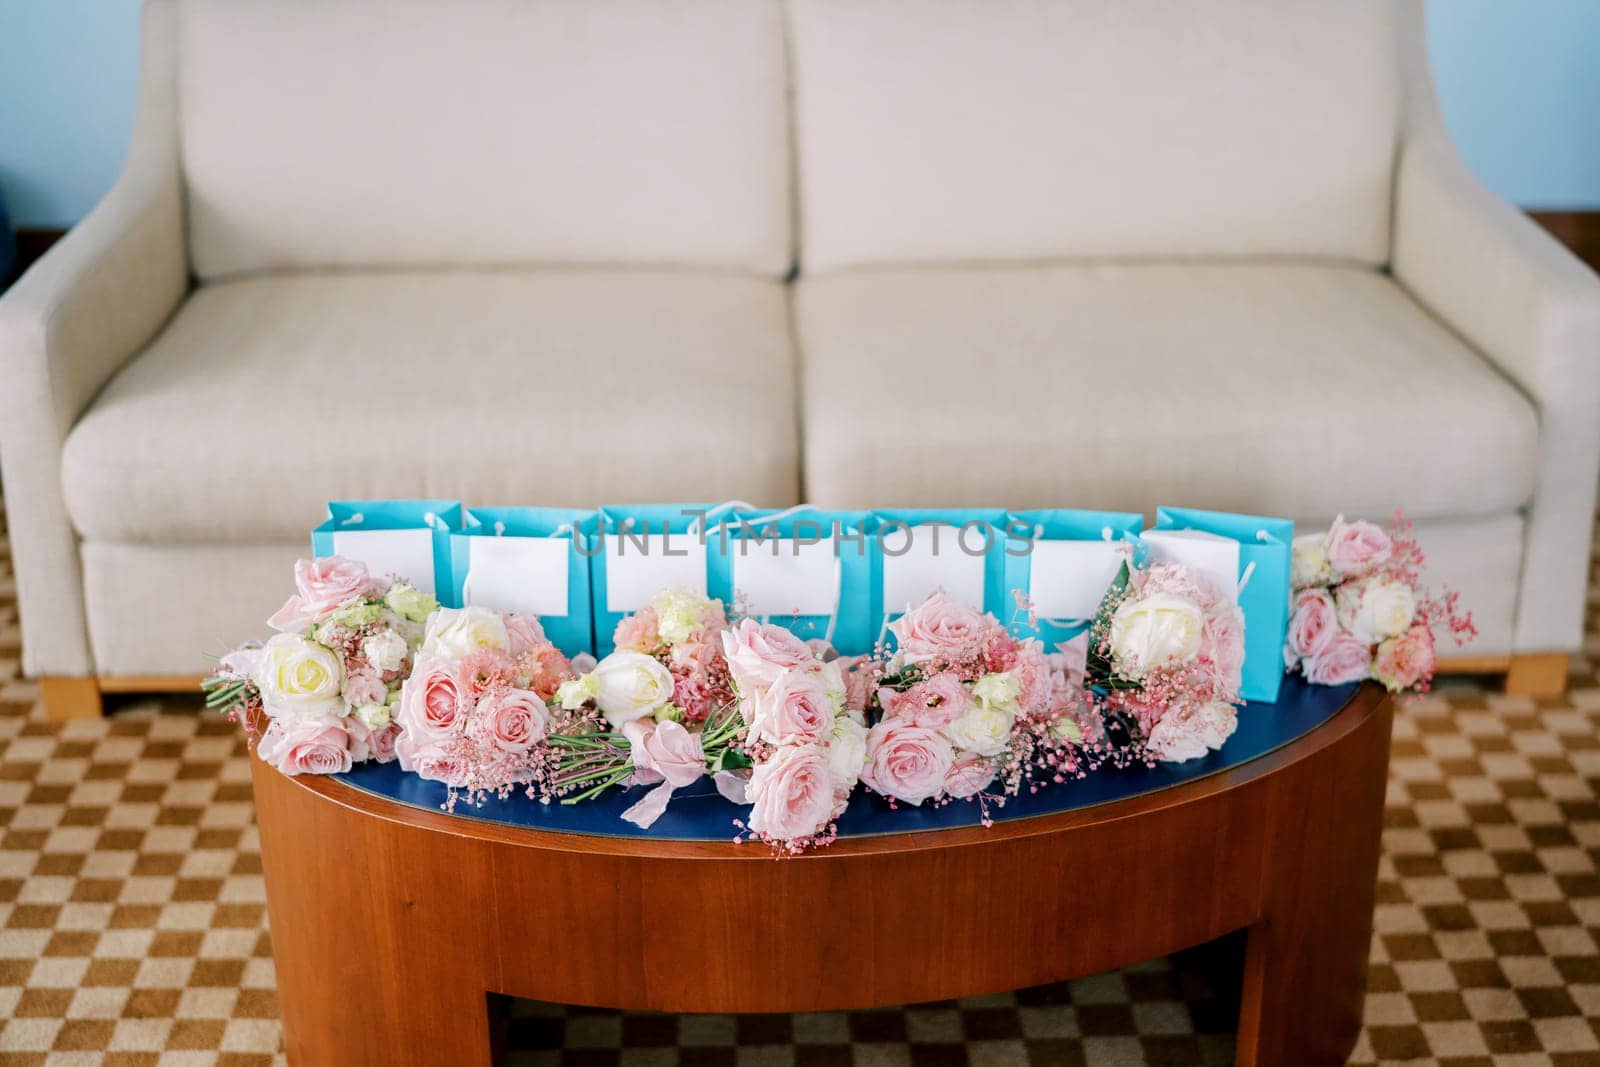 Small bouquets of pink roses lie on the table near blue gift bags in the room. High quality photo